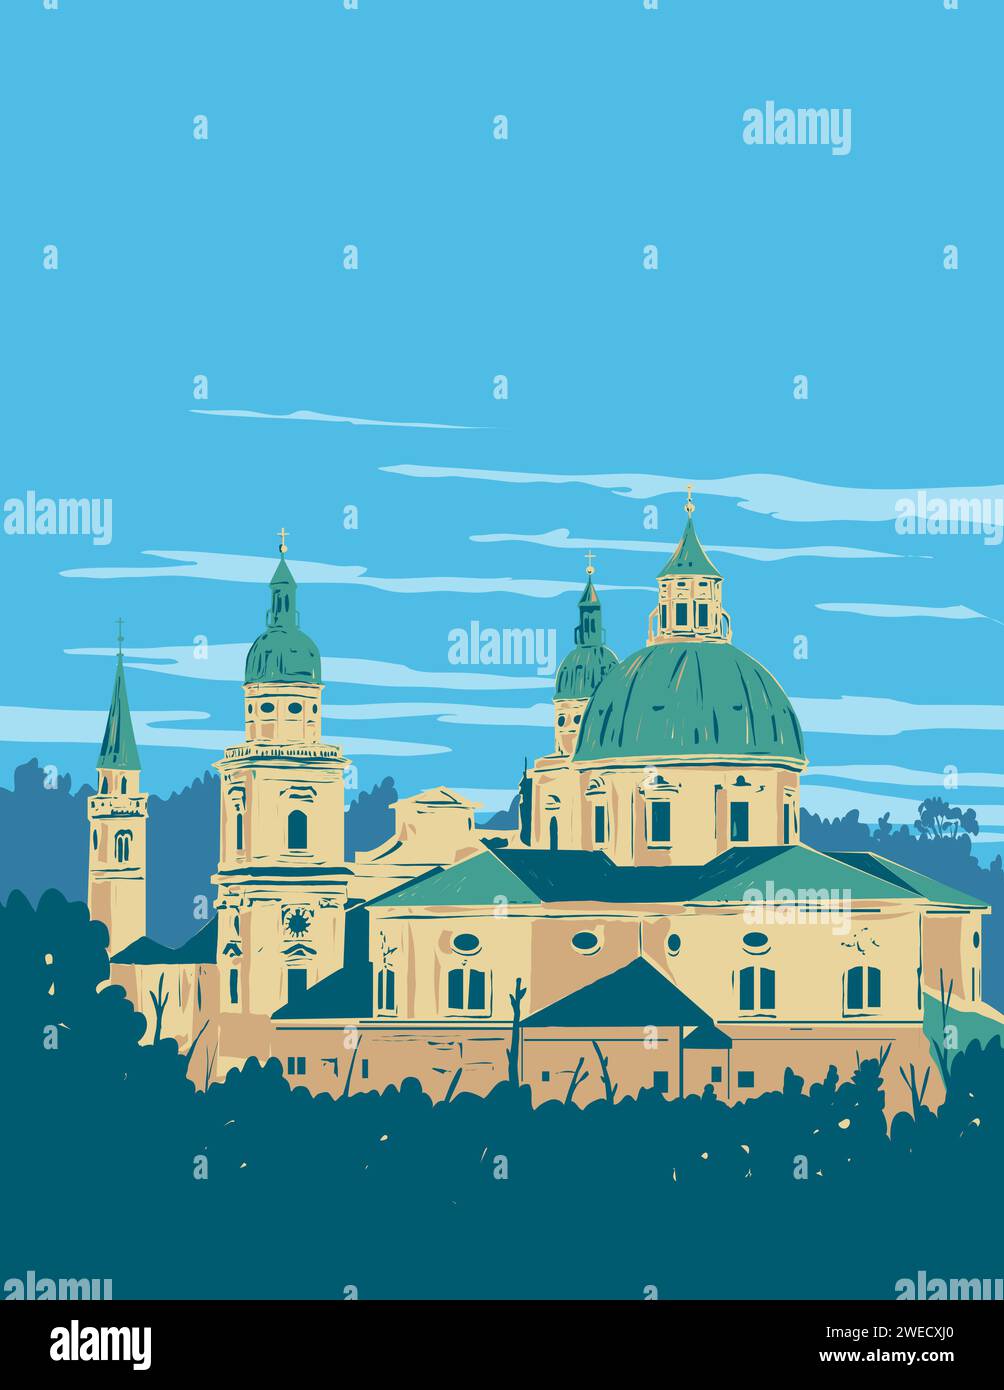 WPA poster art of the Salzburg Cathedral or the Cathedral of Saints Rupert and Vergilius in Domplatz in Altstadt Old Town of Salzburg, Austria done in Stock Photo